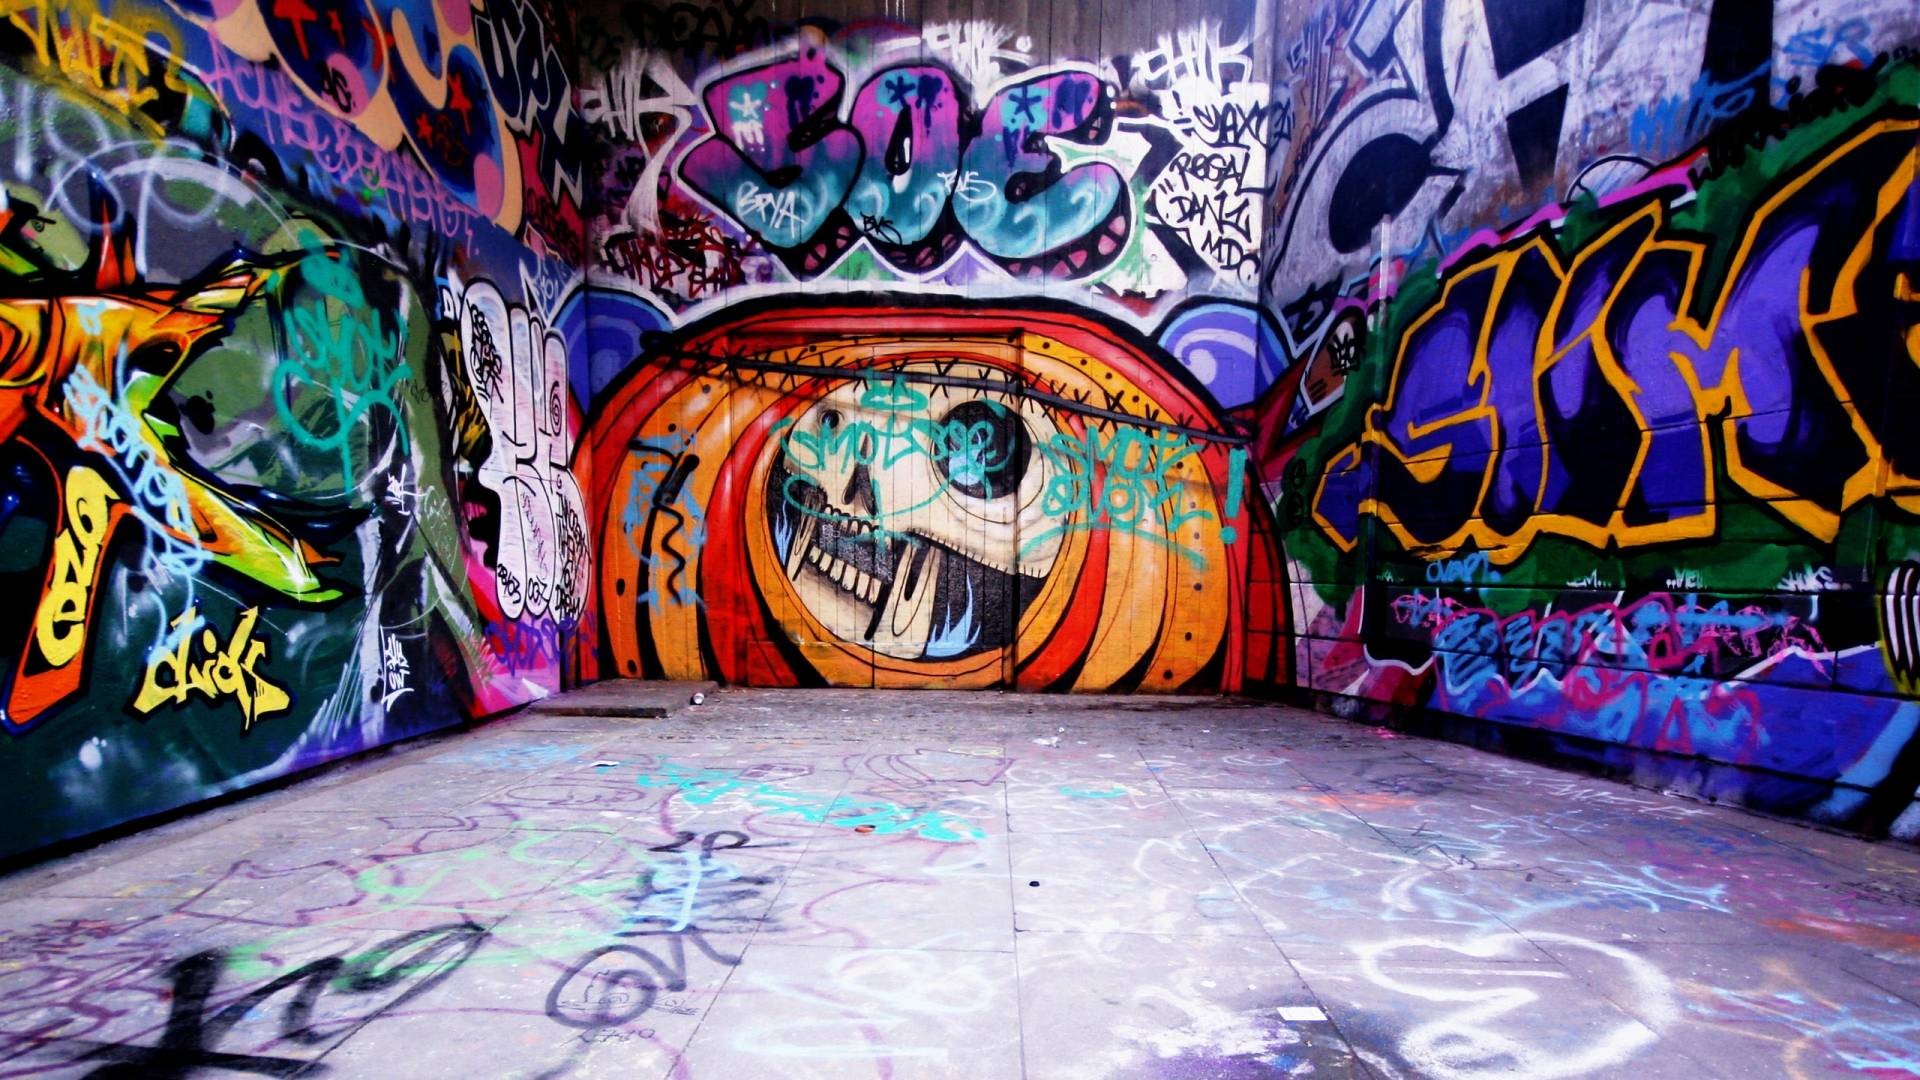 HD Graffiti Wall Backgrounds with image resolution 1920x1080 pixel. You can use this wallpaper as background for your desktop Computer Screensavers, Android or iPhone smartphones